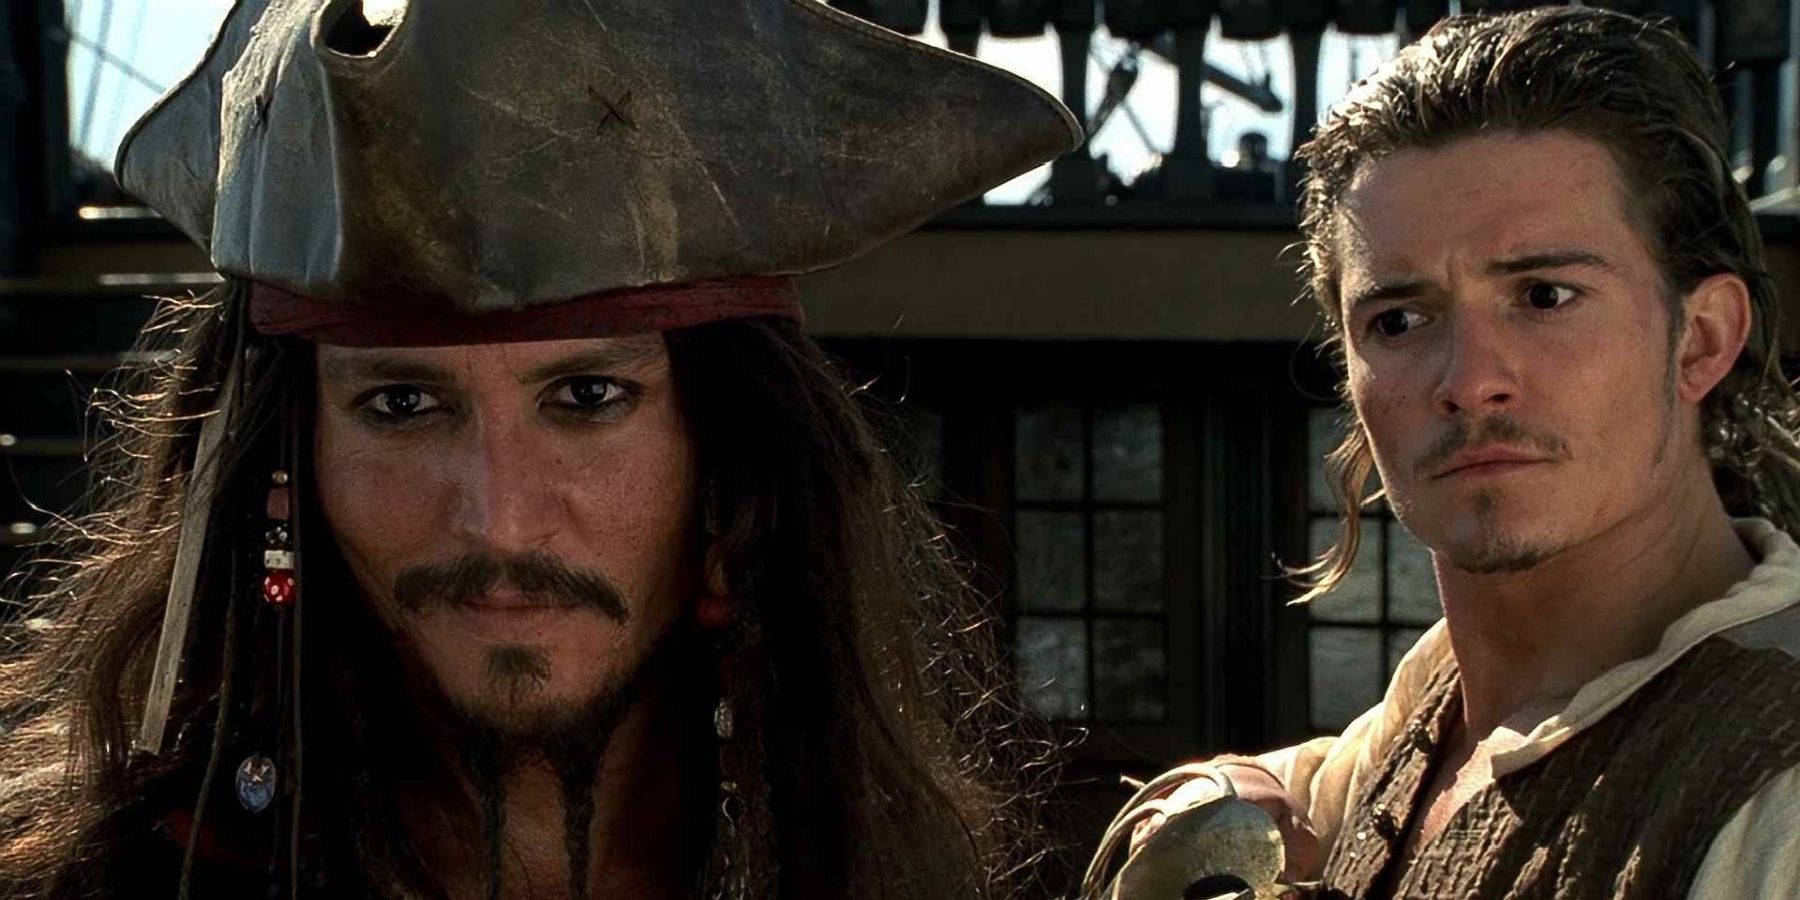 Jack and Will in Pirates of the Caribbean: The Curse of the Black Pearl